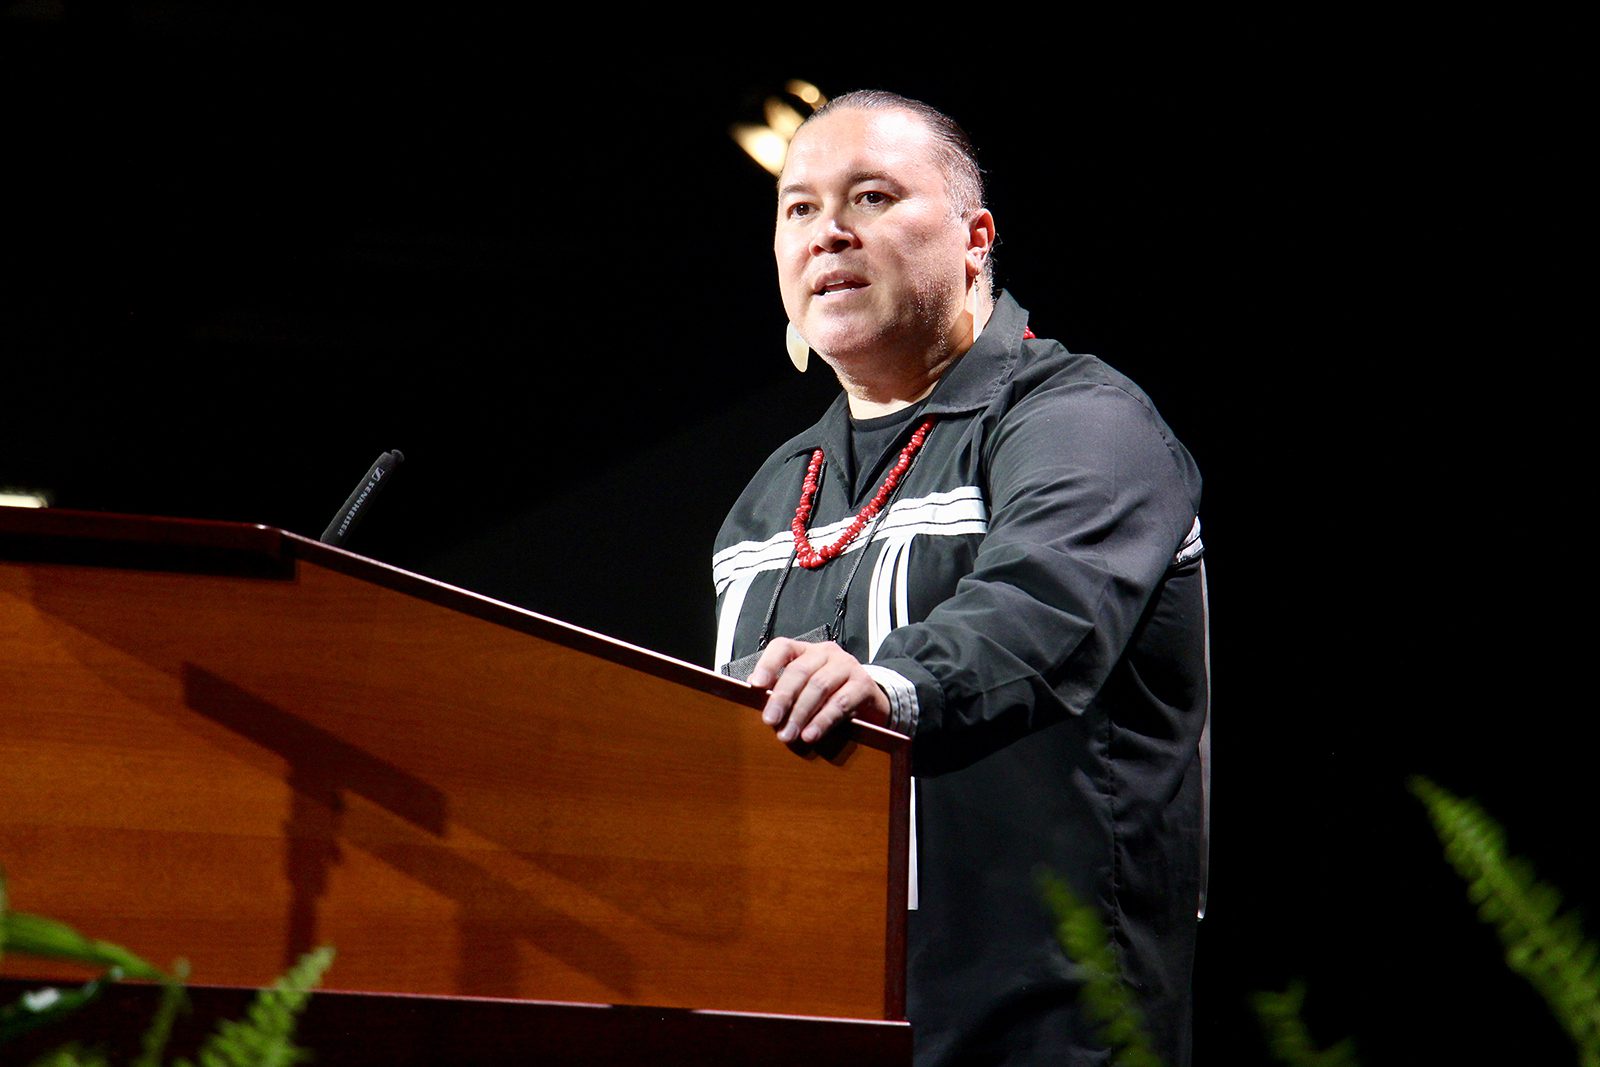 Vance Blackfox, director for Indigenous ministries and tribal relations for the Evangelical Lutheran Church in America, addresses the ELCA Churchwide Assembly, Aug. 10, 2022, in Columbus, Ohio. RNS photo by Emily McFarlan Miller